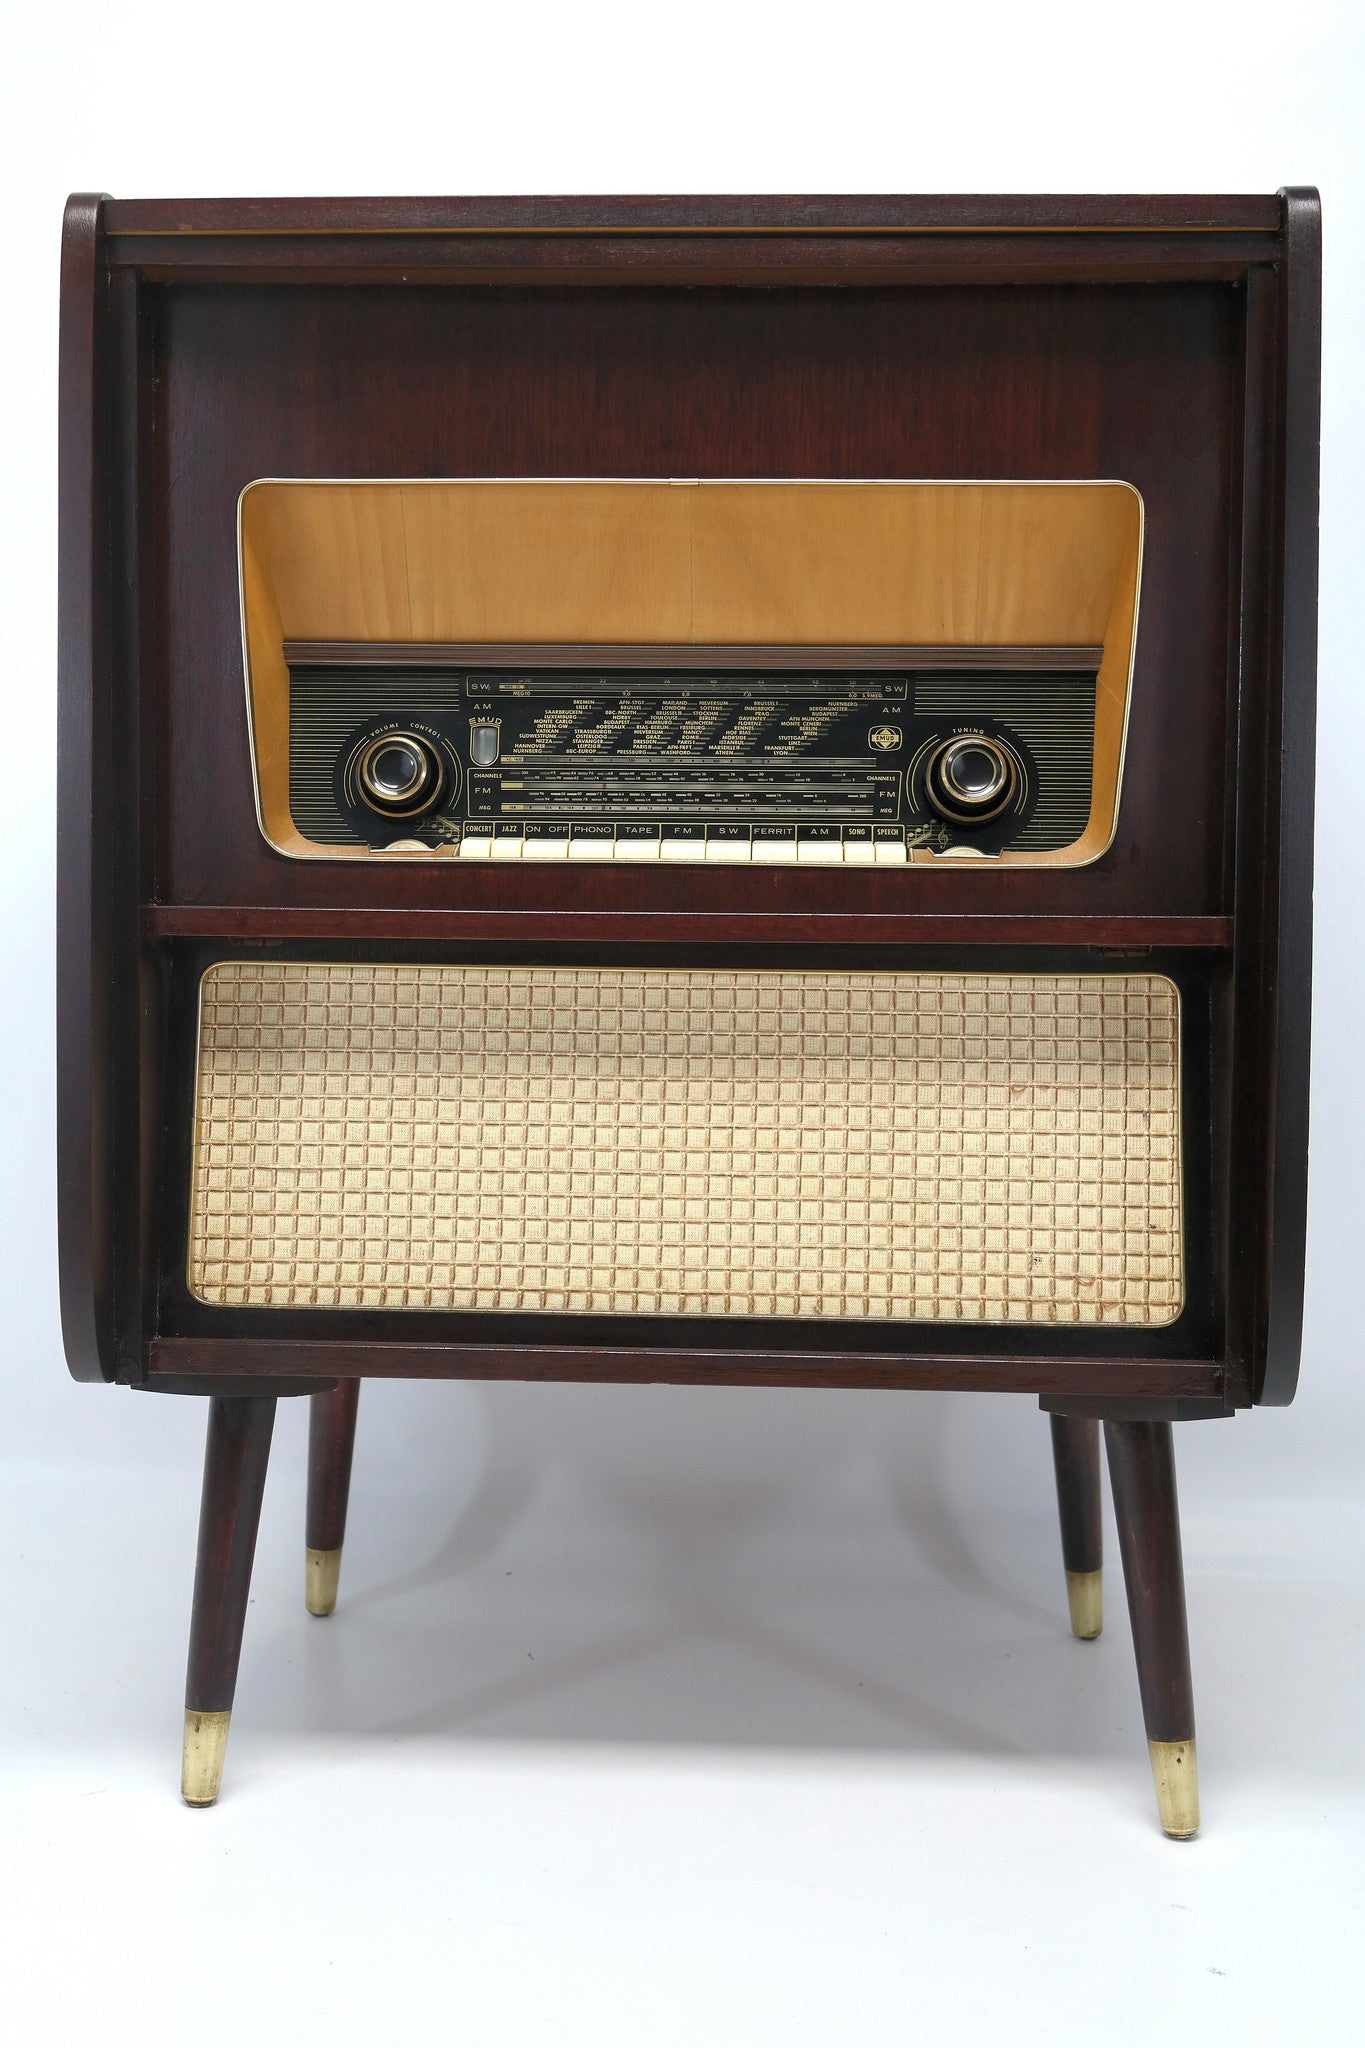 Mid Century EMUD 713 Stereo Console Record Player - Bluetooth iPod iPhone Android Input AM/FM Tuner The Vintedge Co.